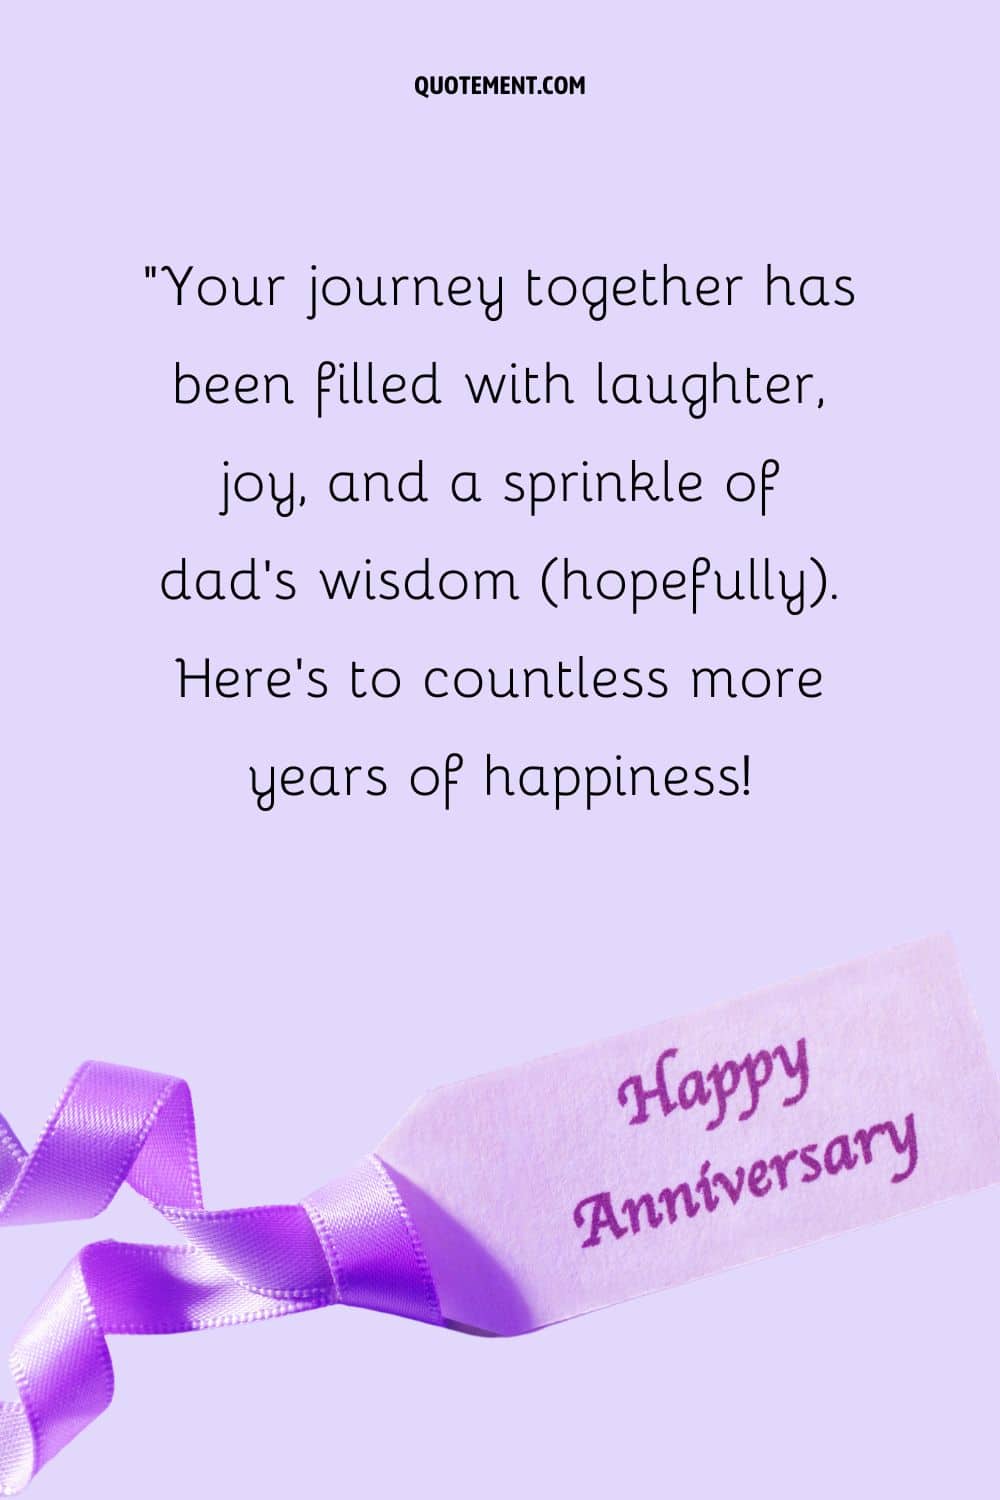 happy anniversary message on paper with purple ribbon
